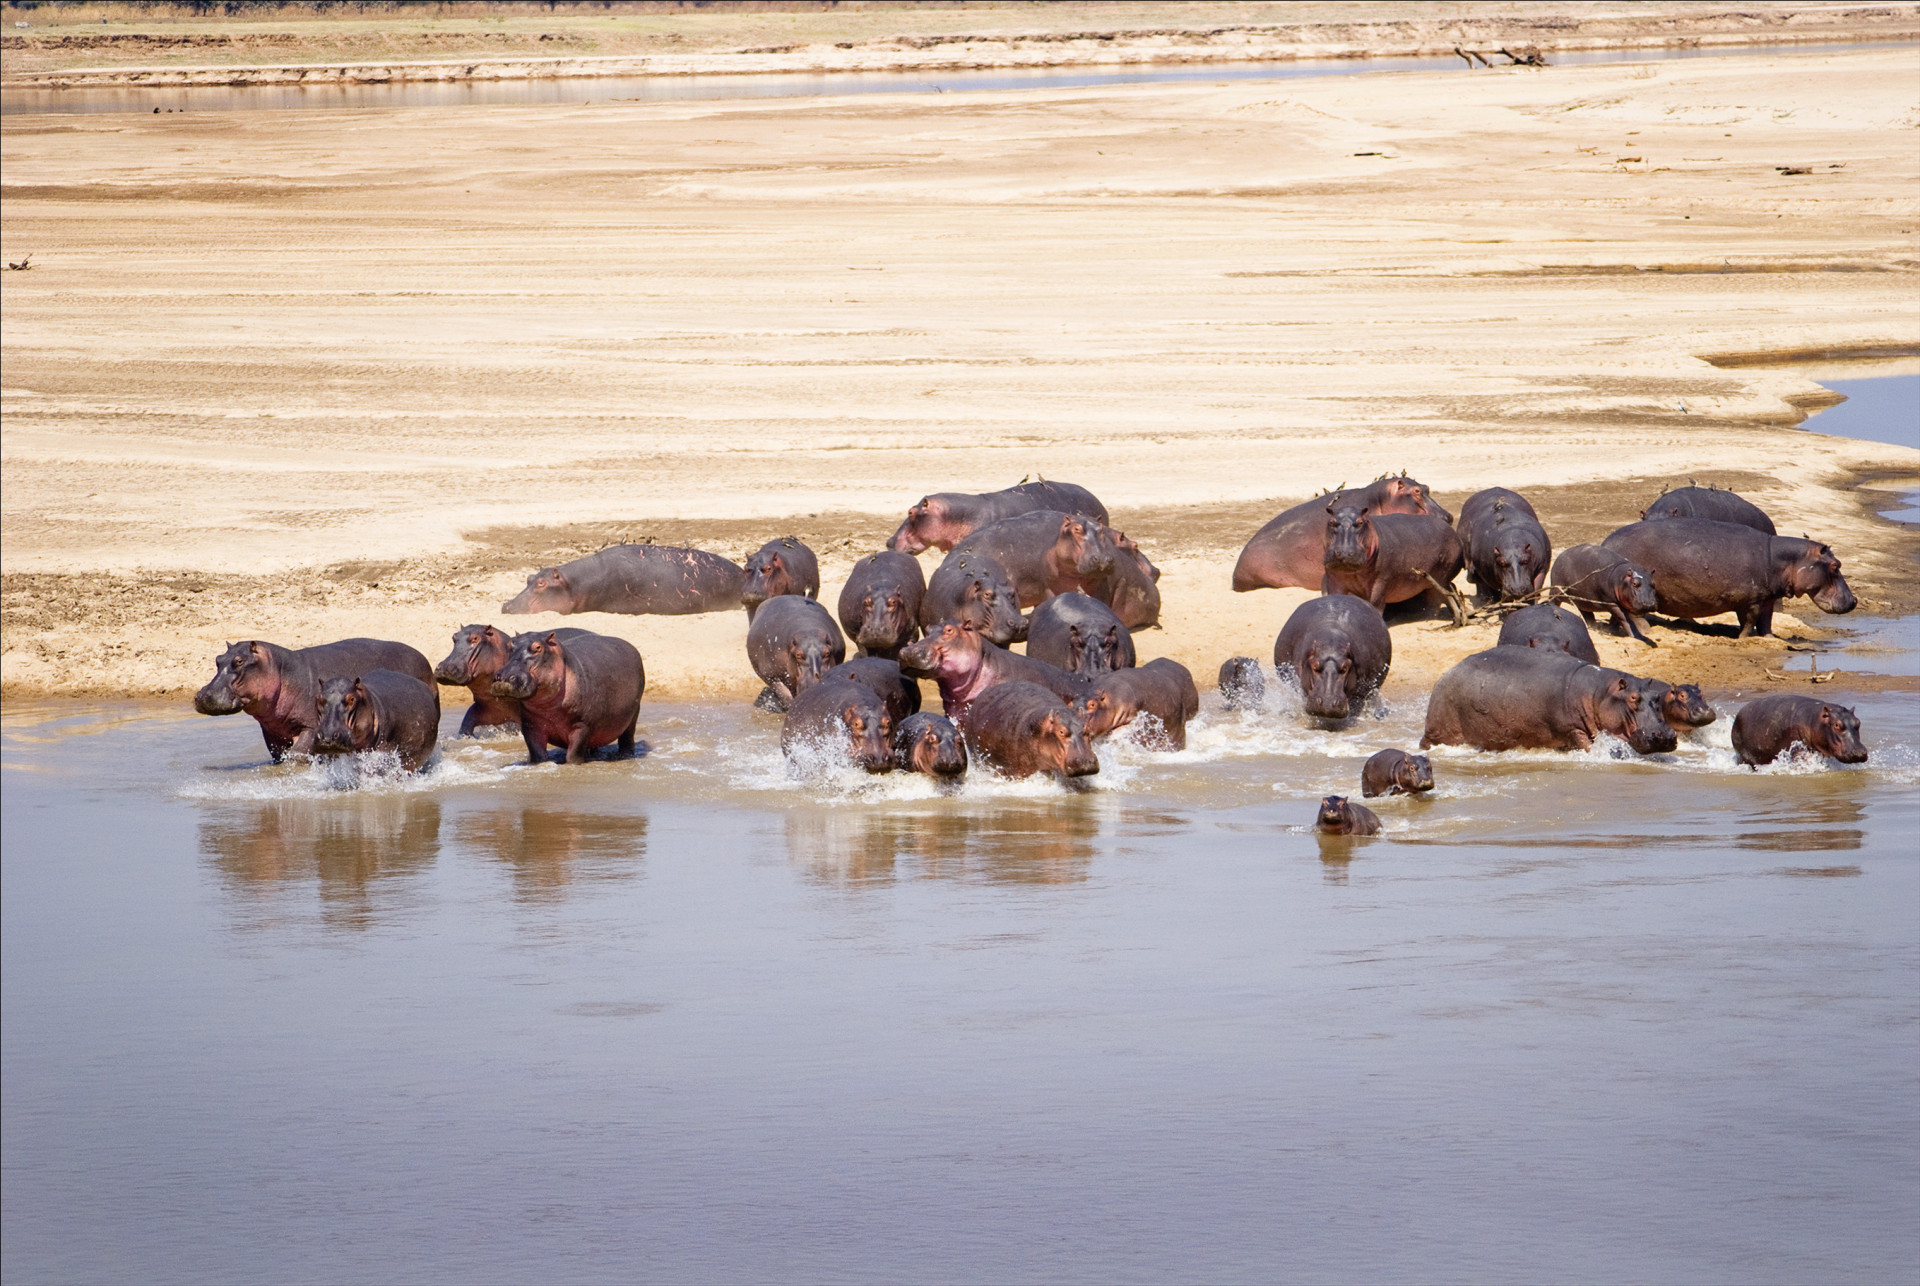 Here we see a family of hippos by the Luangwa River. If you want to see images like this one in real life, then the Luangwa South National Park is the place to go.<p>You may also like:<a href="https://www.starsinsider.com/n/494870?utm_source=msn.com&utm_medium=display&utm_campaign=referral_description&utm_content=212512en-nz"> The extravagant spending of royals around the world</a></p>